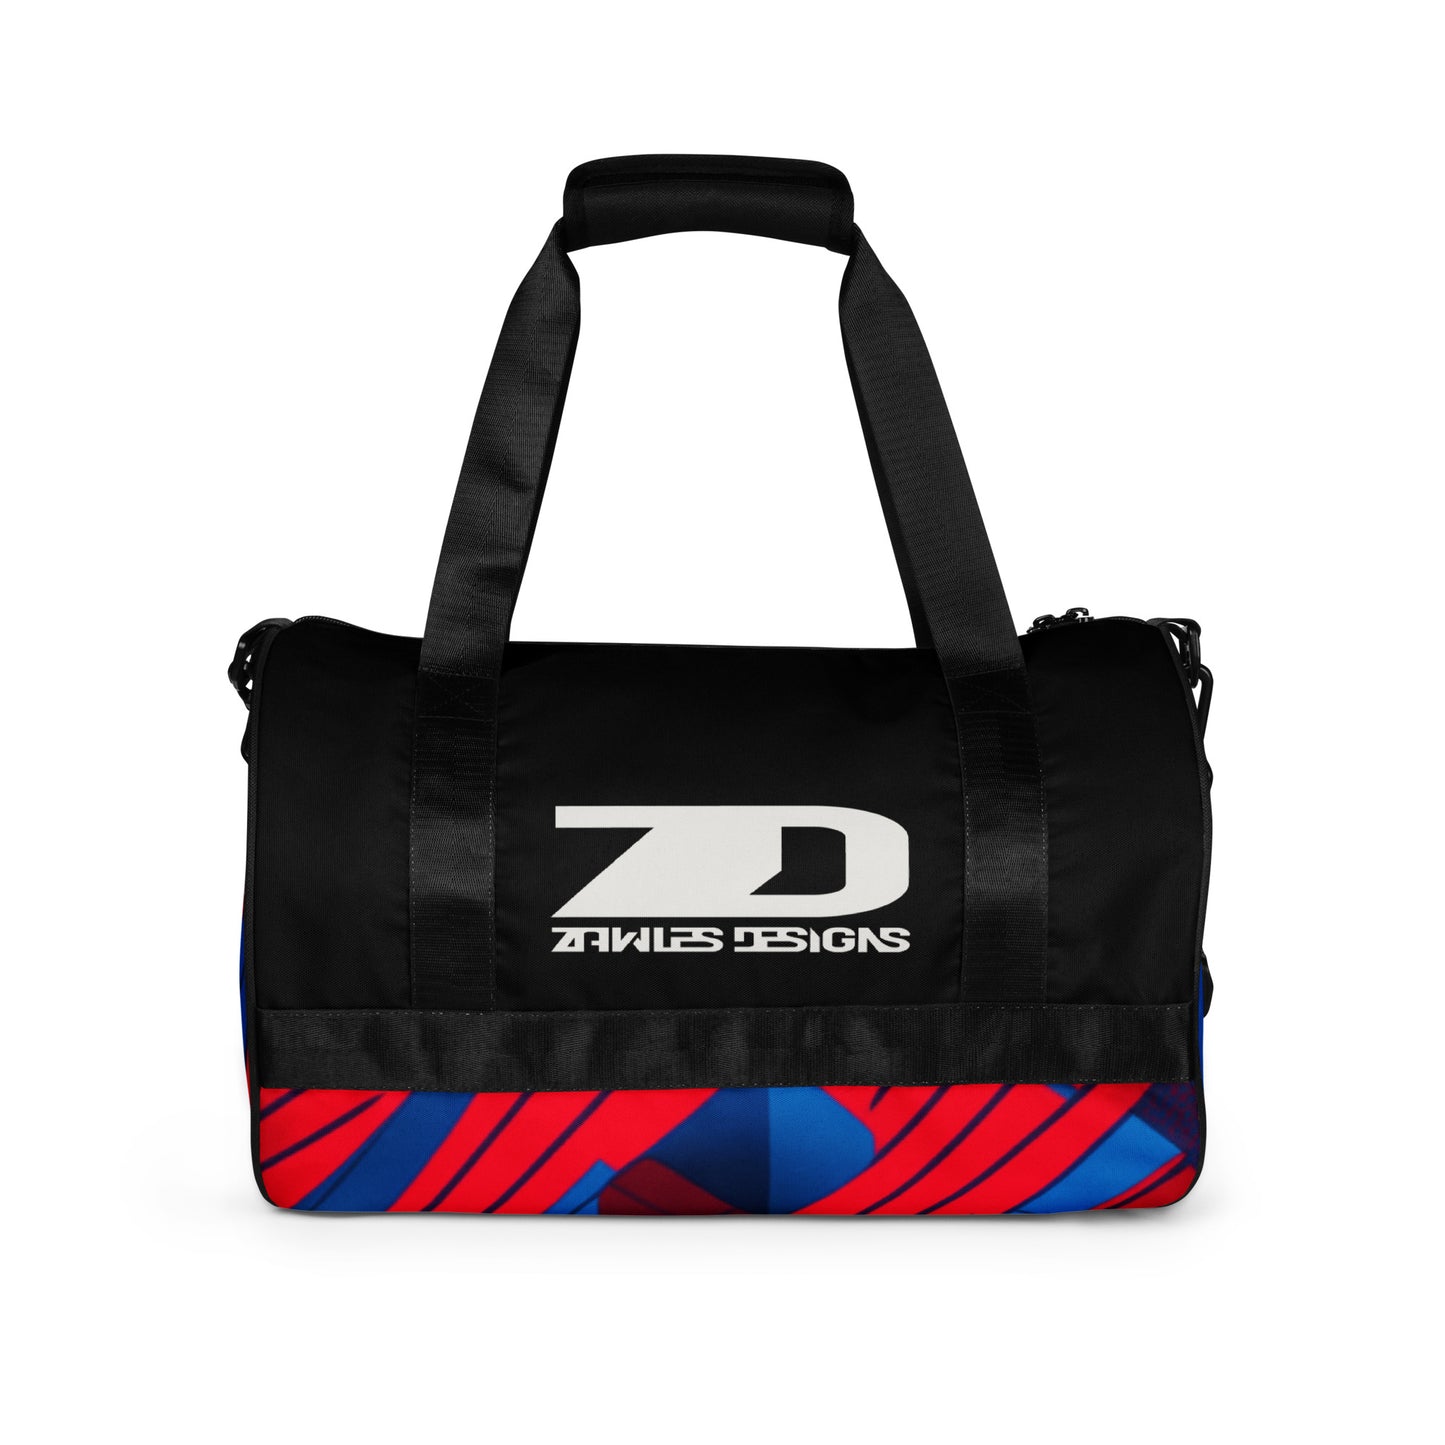 Water-resistant Gym Bag by Zawles Designs